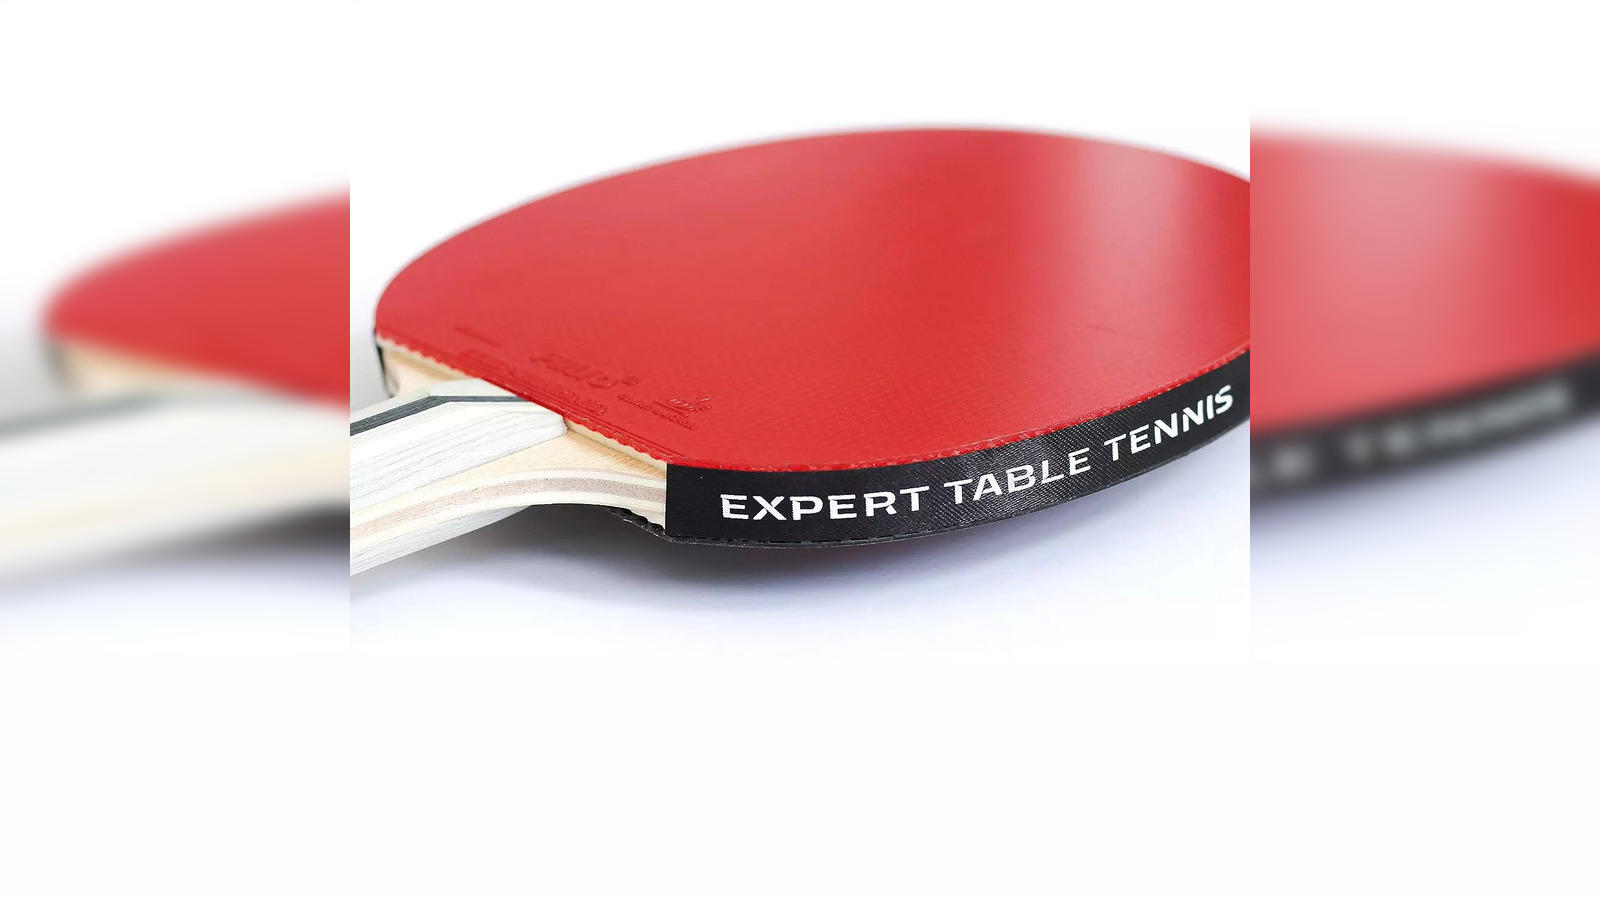 Stag Sports - Best Table Tennis Equipment, table tennis rackets, table